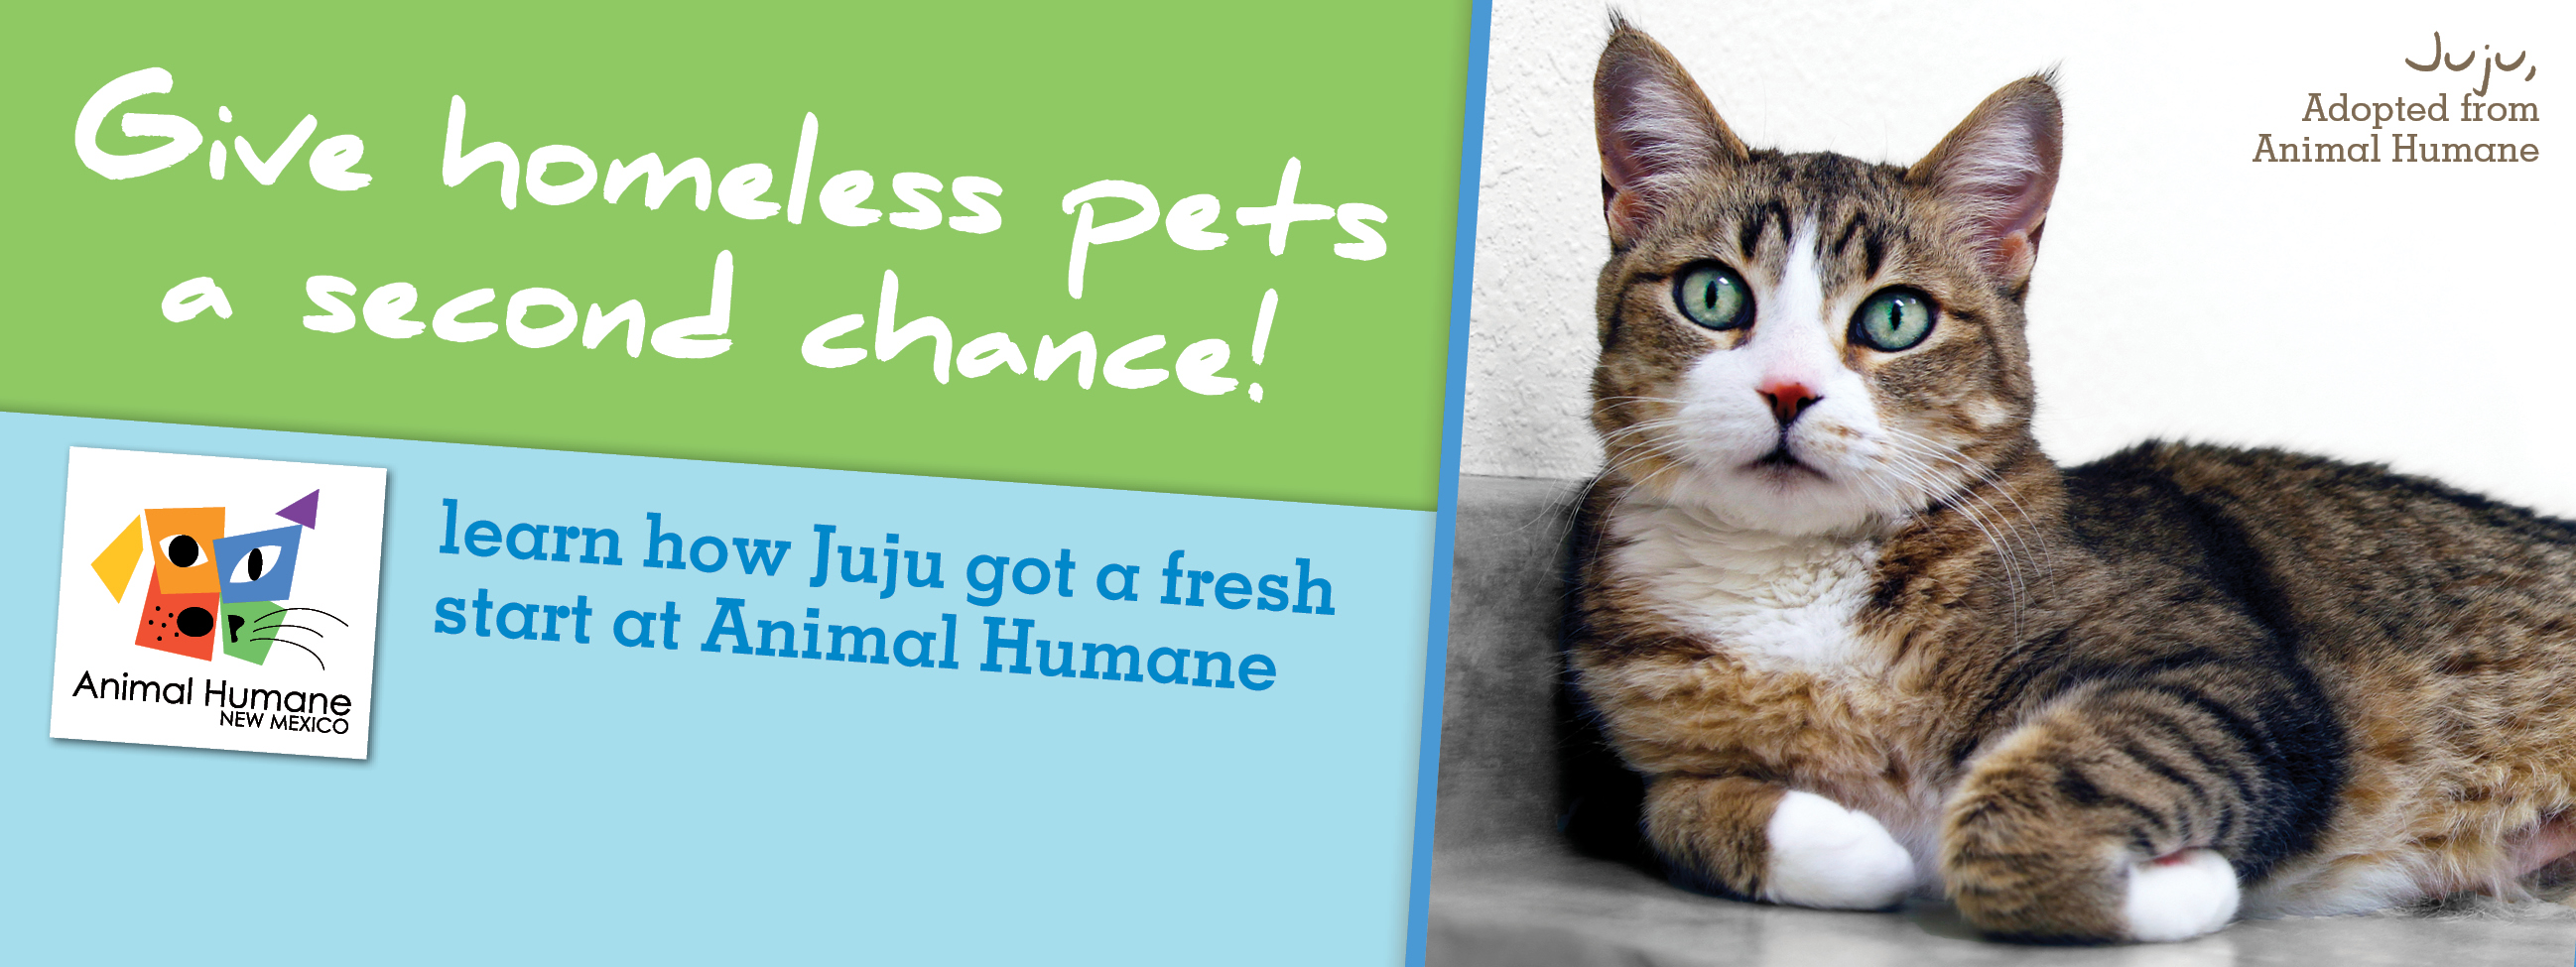 Give homeless pets a second chance!